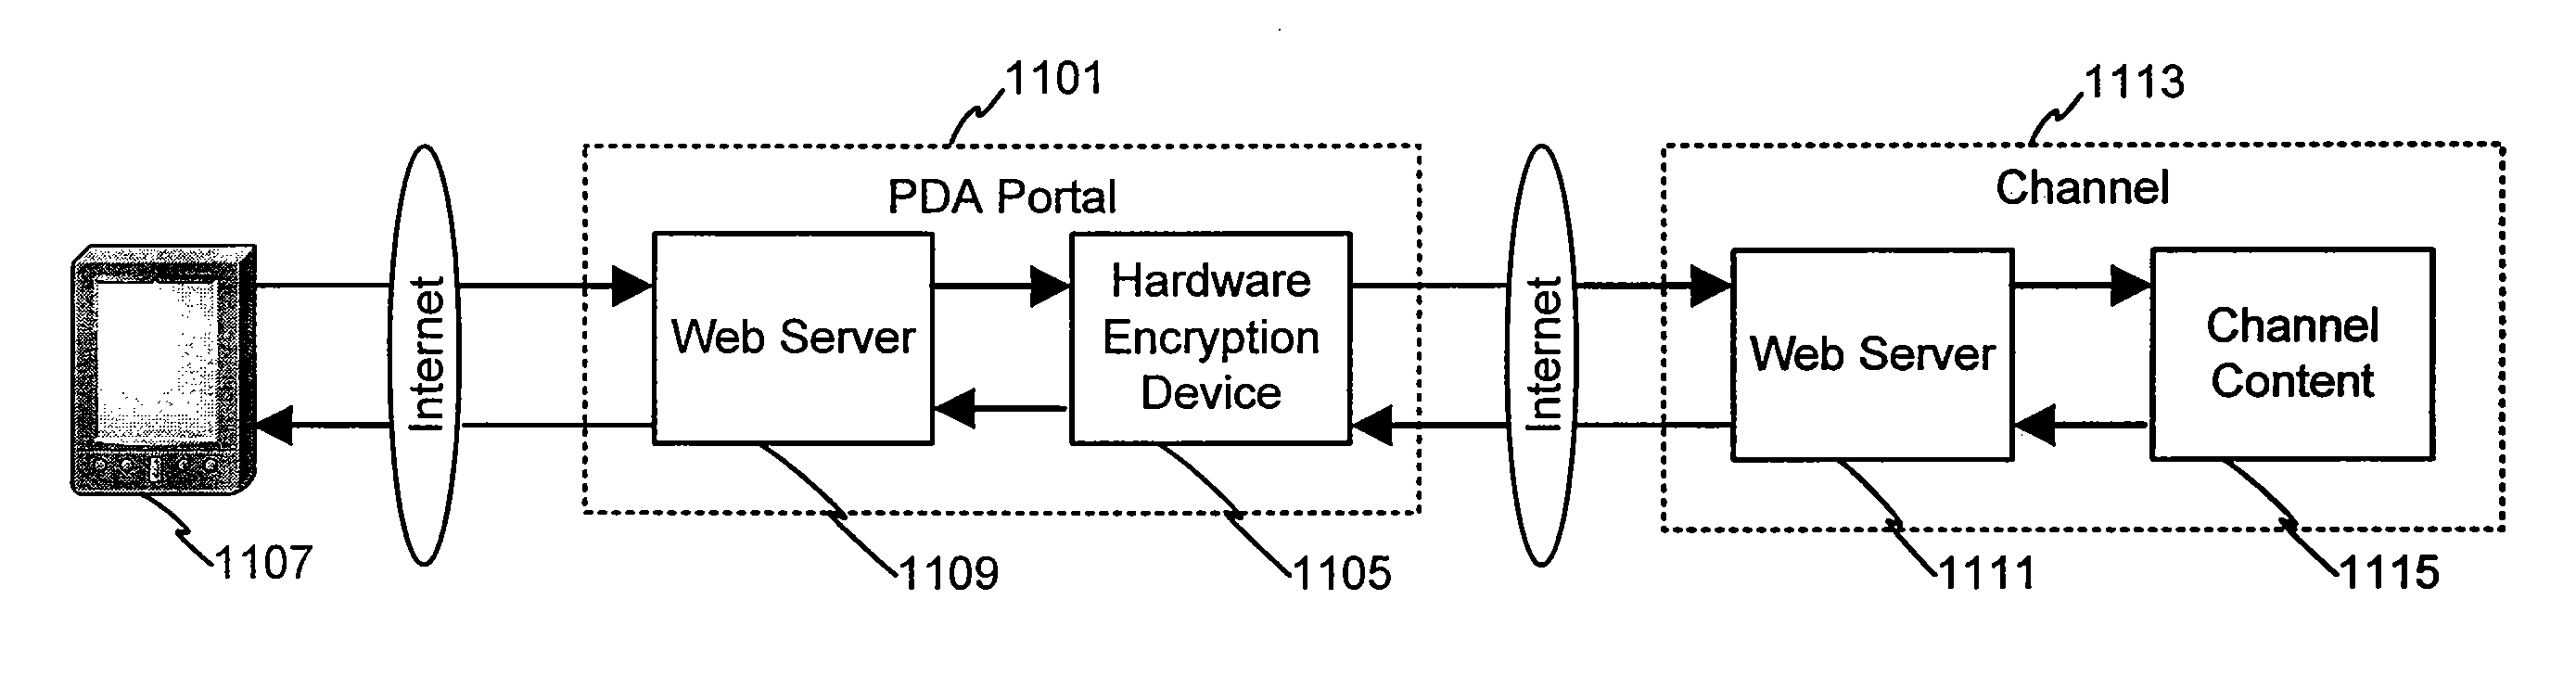 System and method for securing data through a PDA portal